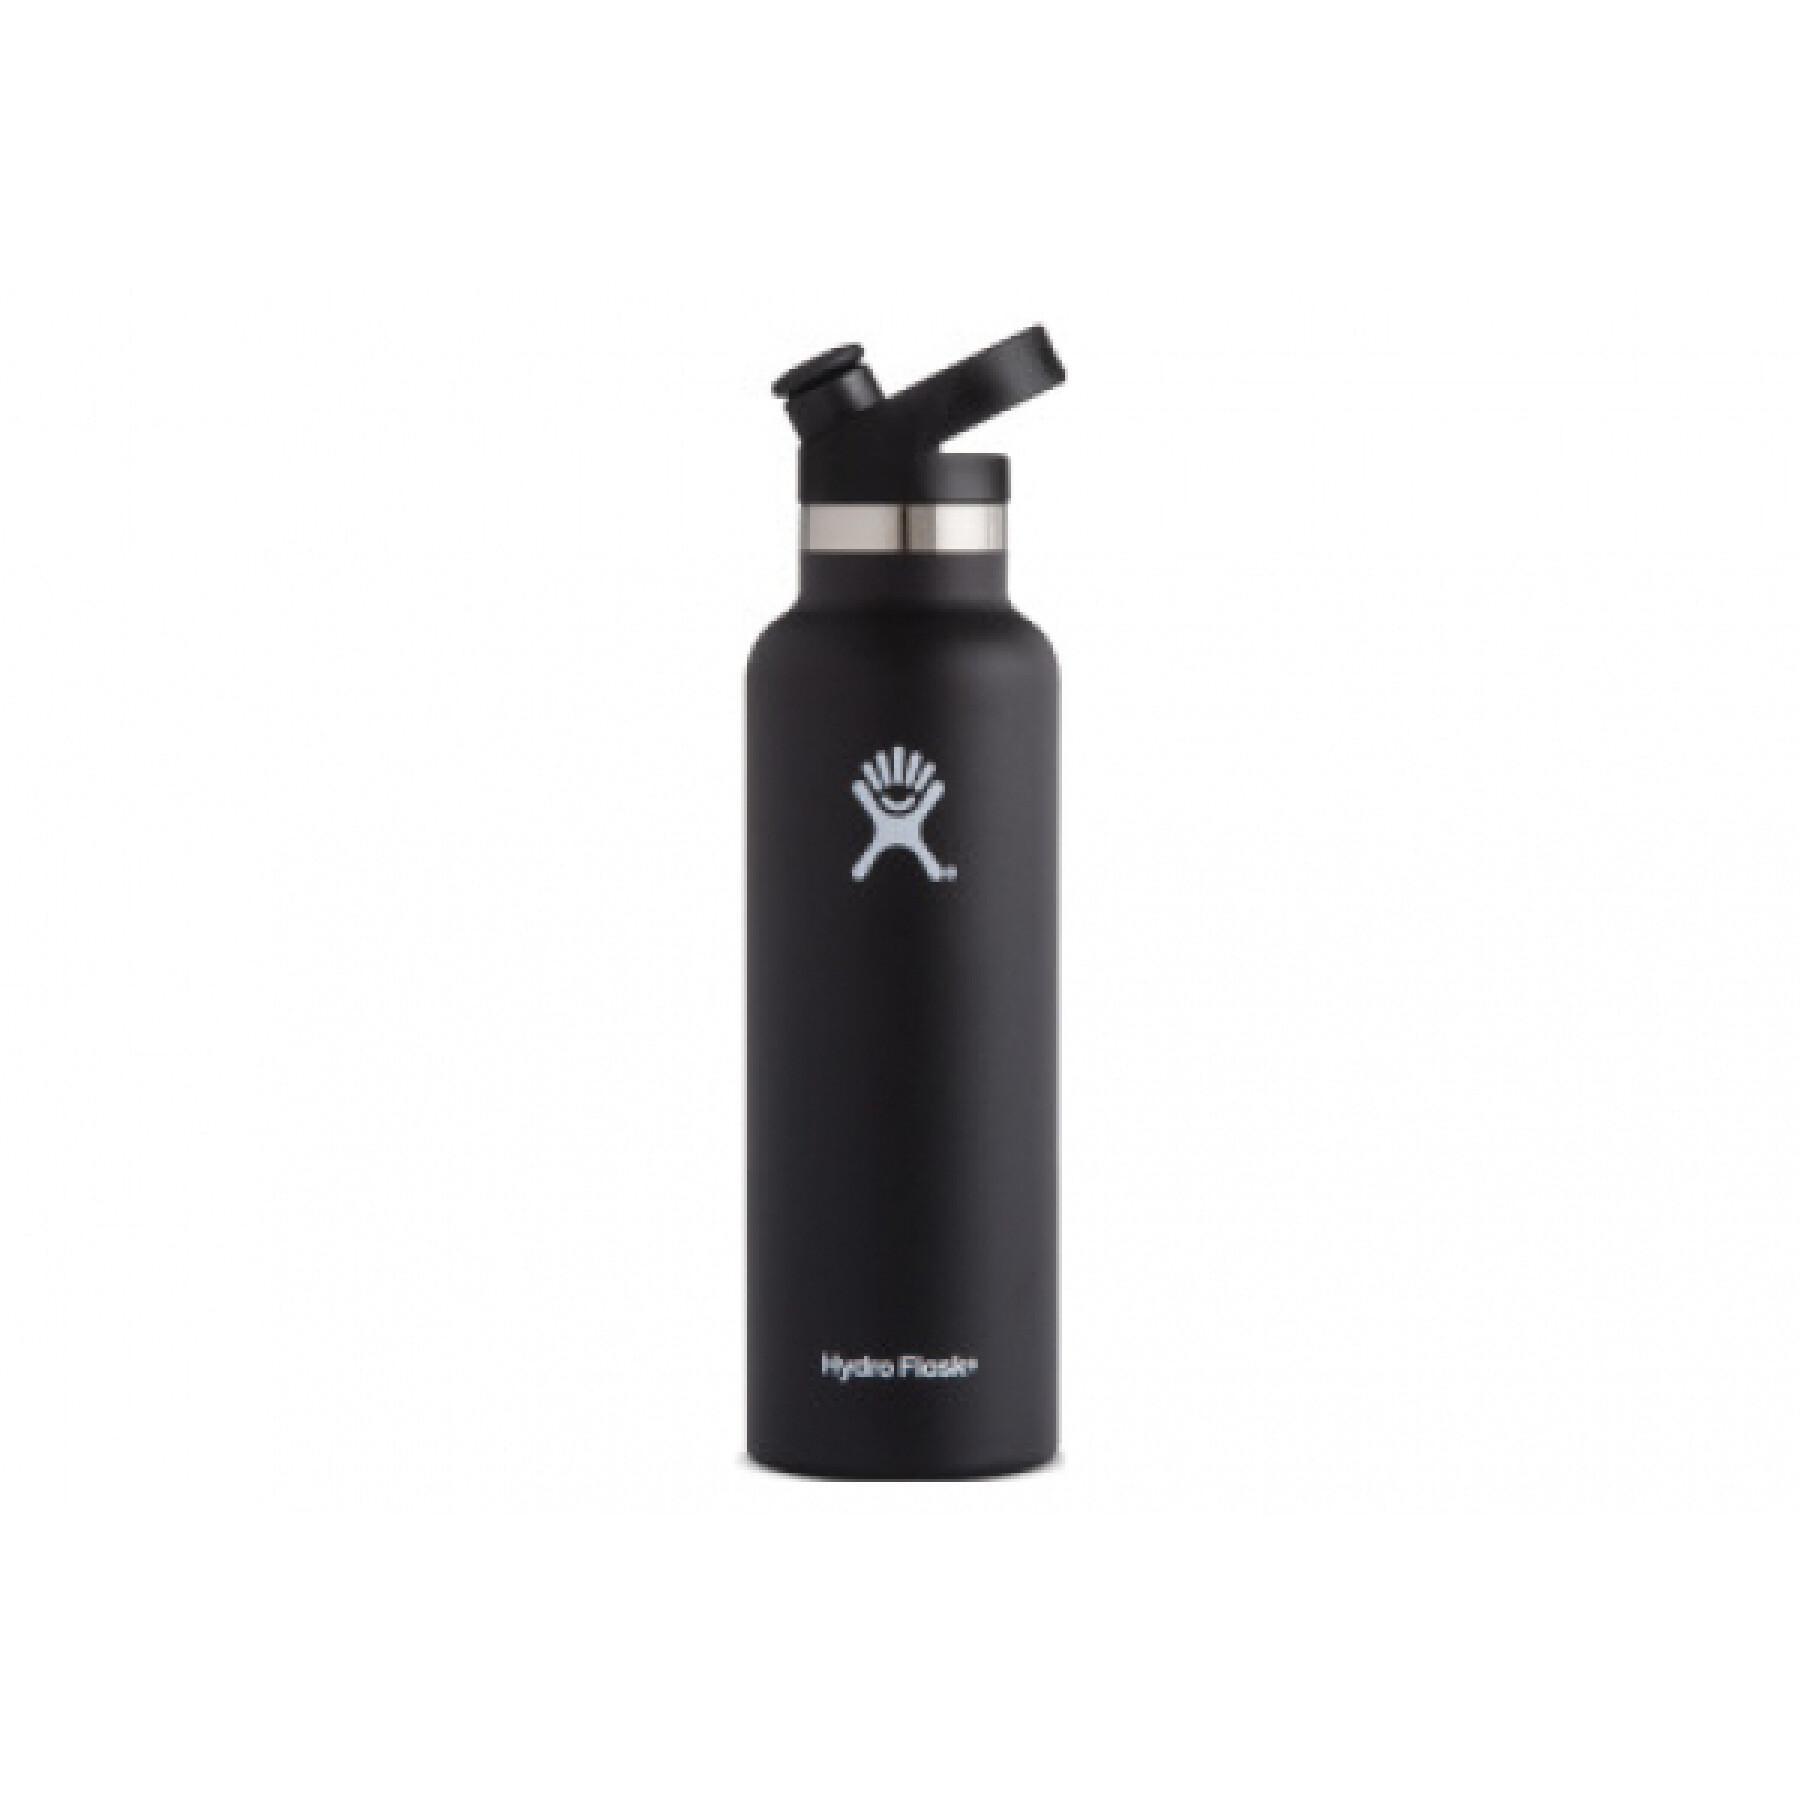 Standaardfles Hydro Flask mouth with sport cap 21 oz